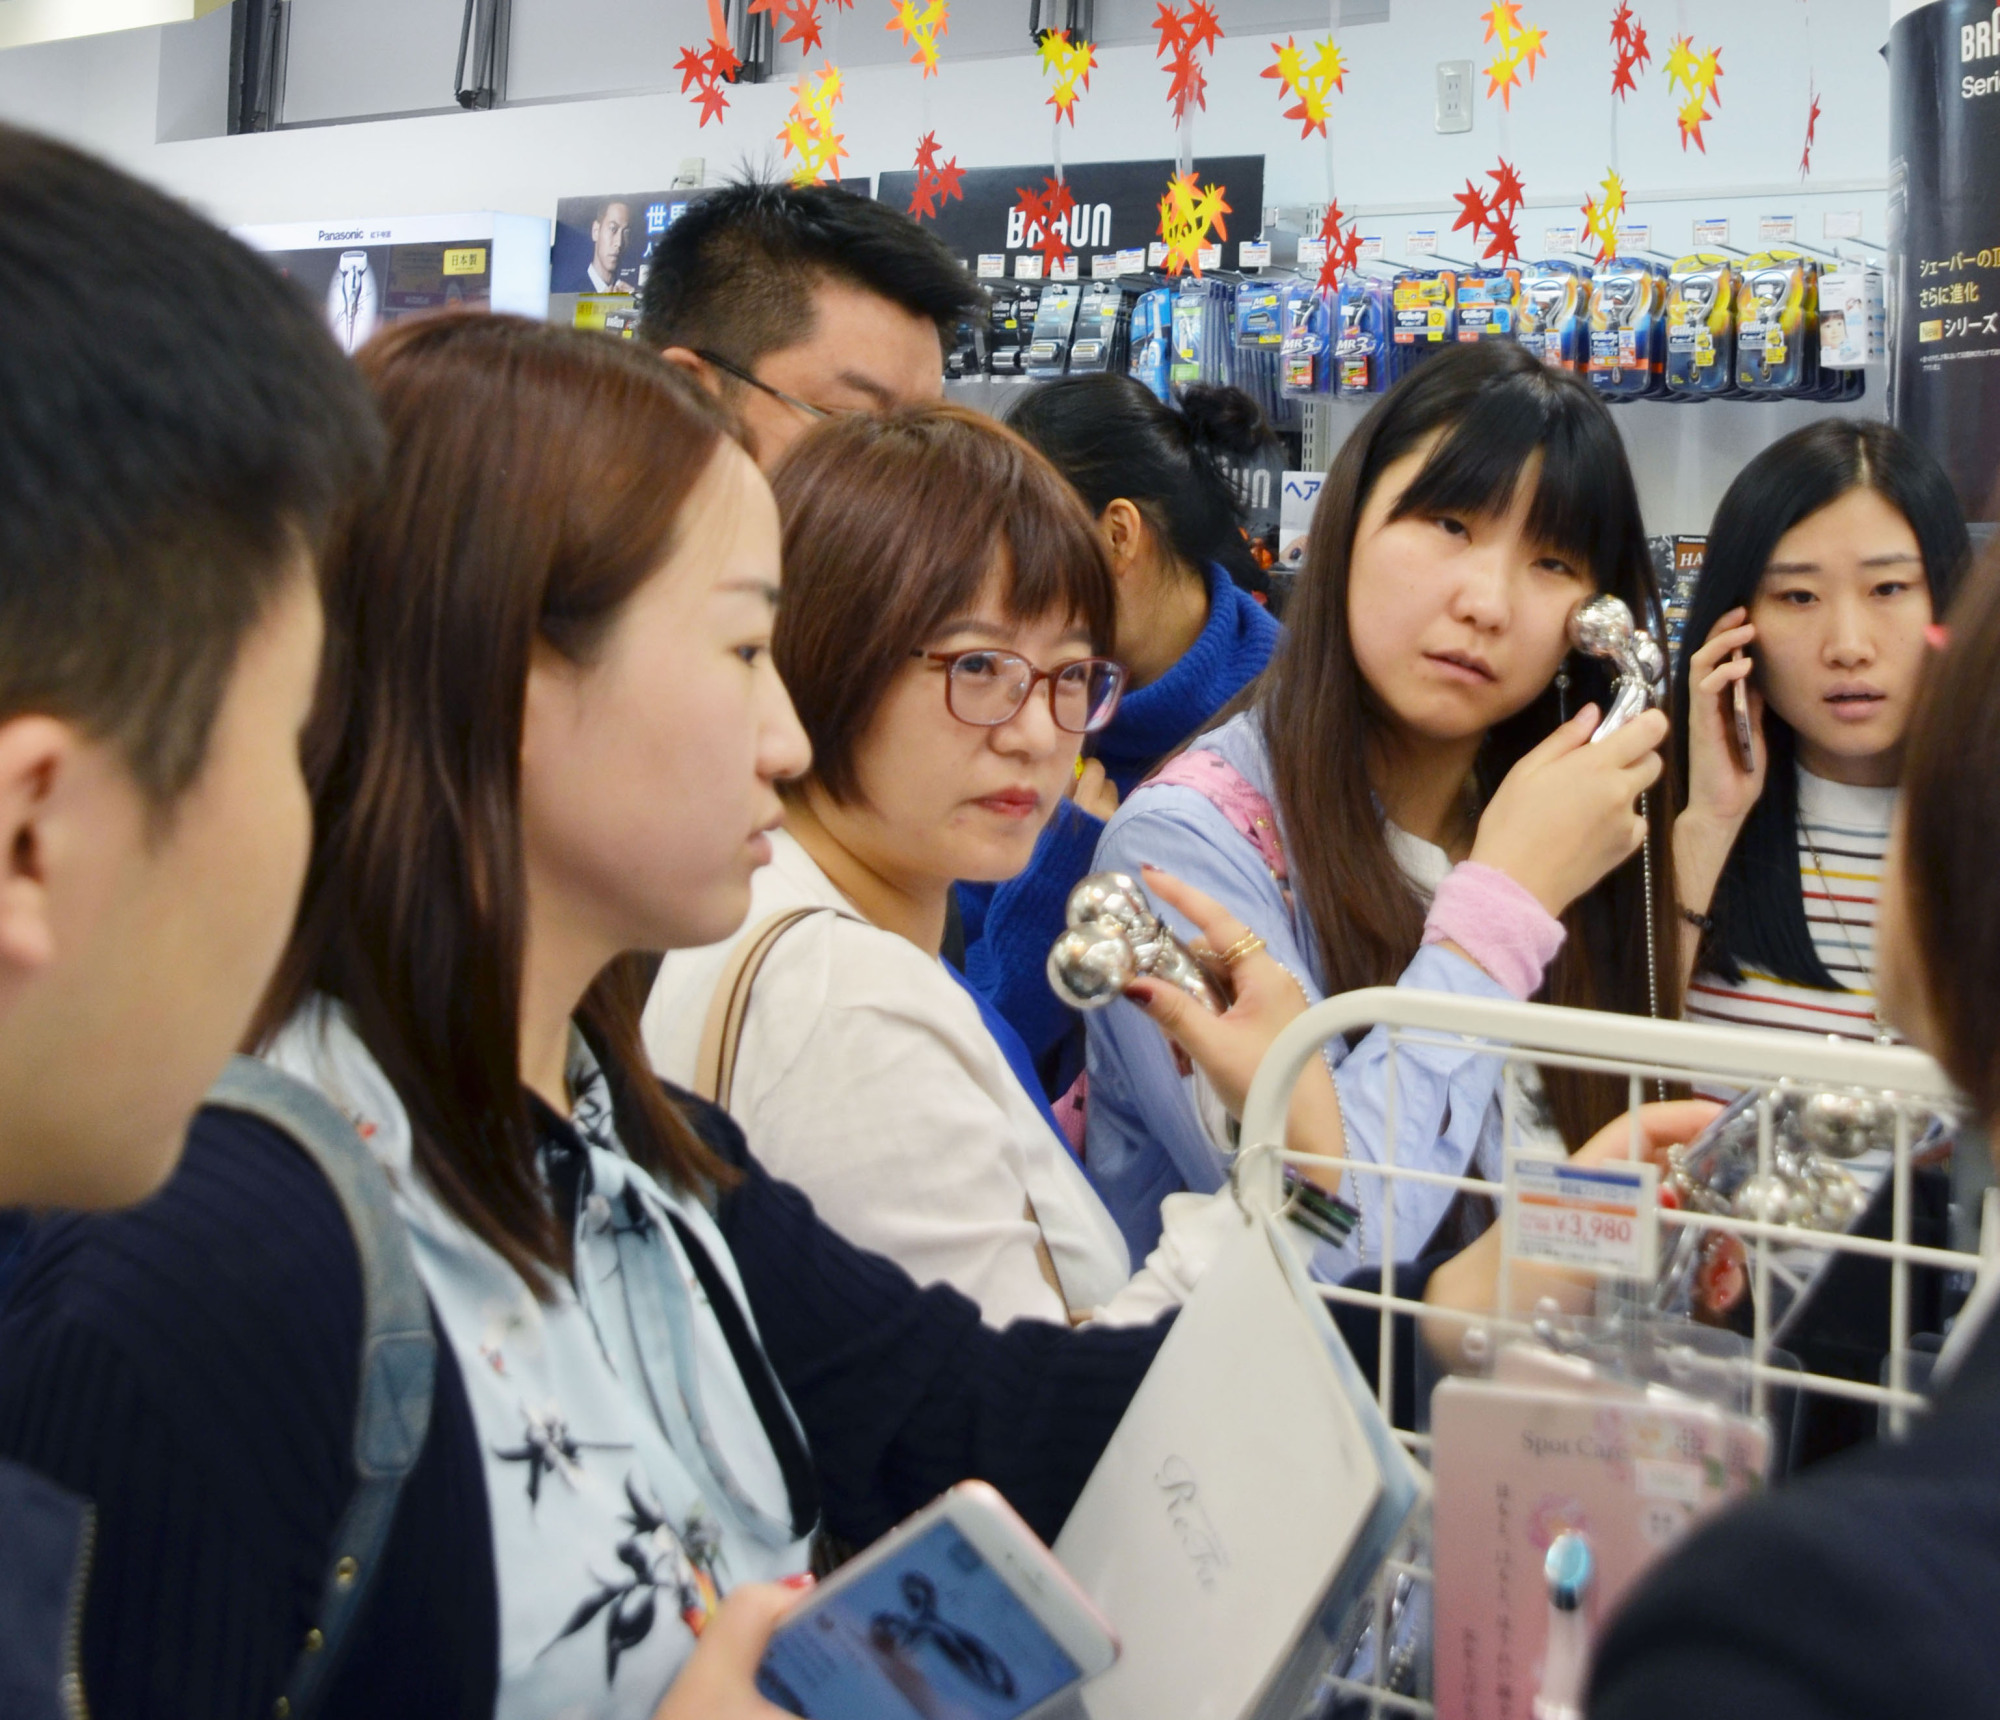 Chinese shoppers check out beauty products at a duty-free store in Tokyo's Akihabara district in 2017. | KYODO